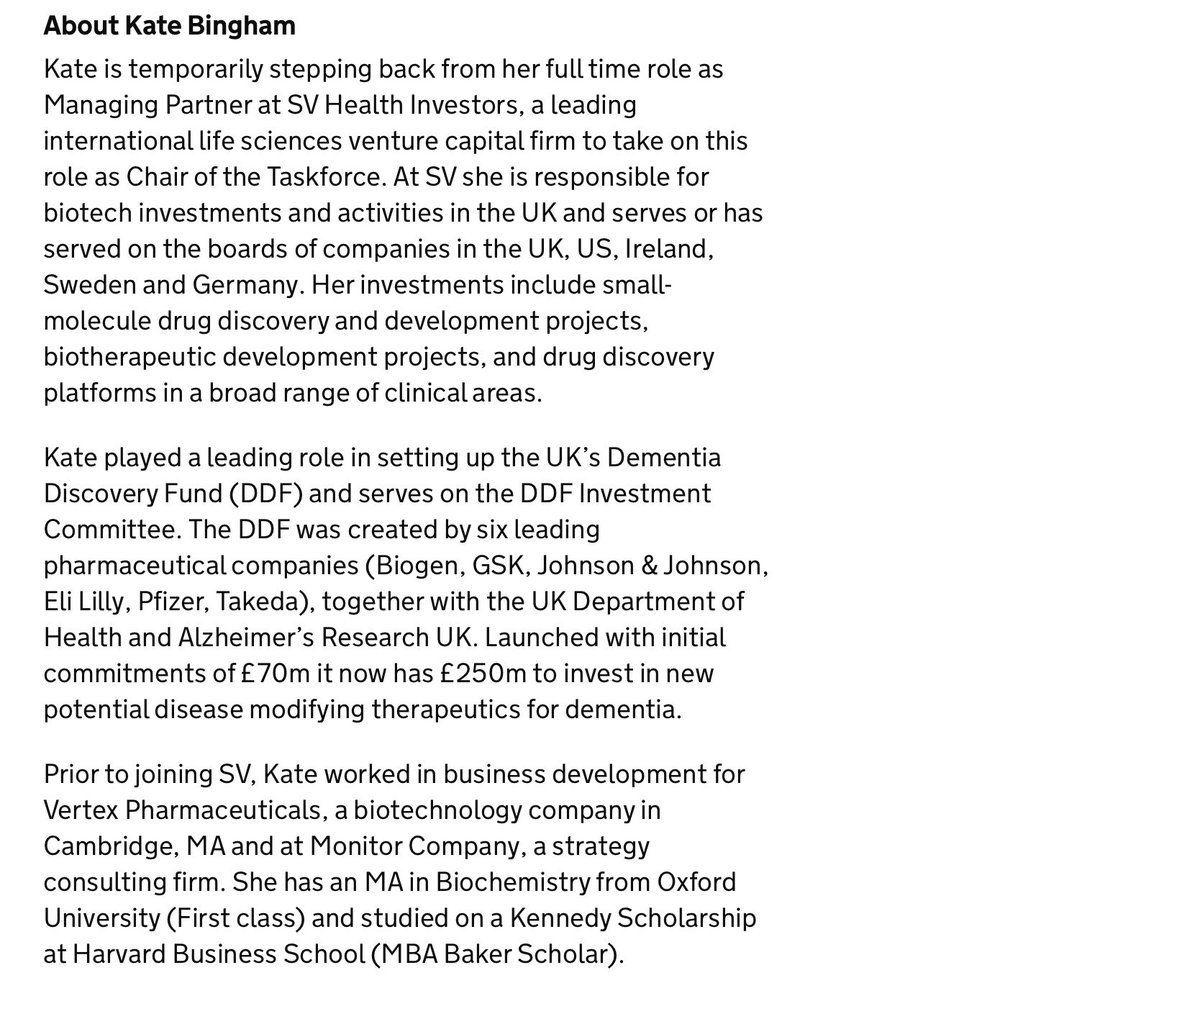 And the truth turned out to be that Kate Bingham did offer her time and talents in service of the public good, and the cv that was published with the announcement of her appointment made it clear what experience and skills - all omitted from the sneer here - she had for that role  https://twitter.com/BristOliver/status/1355072554592043010